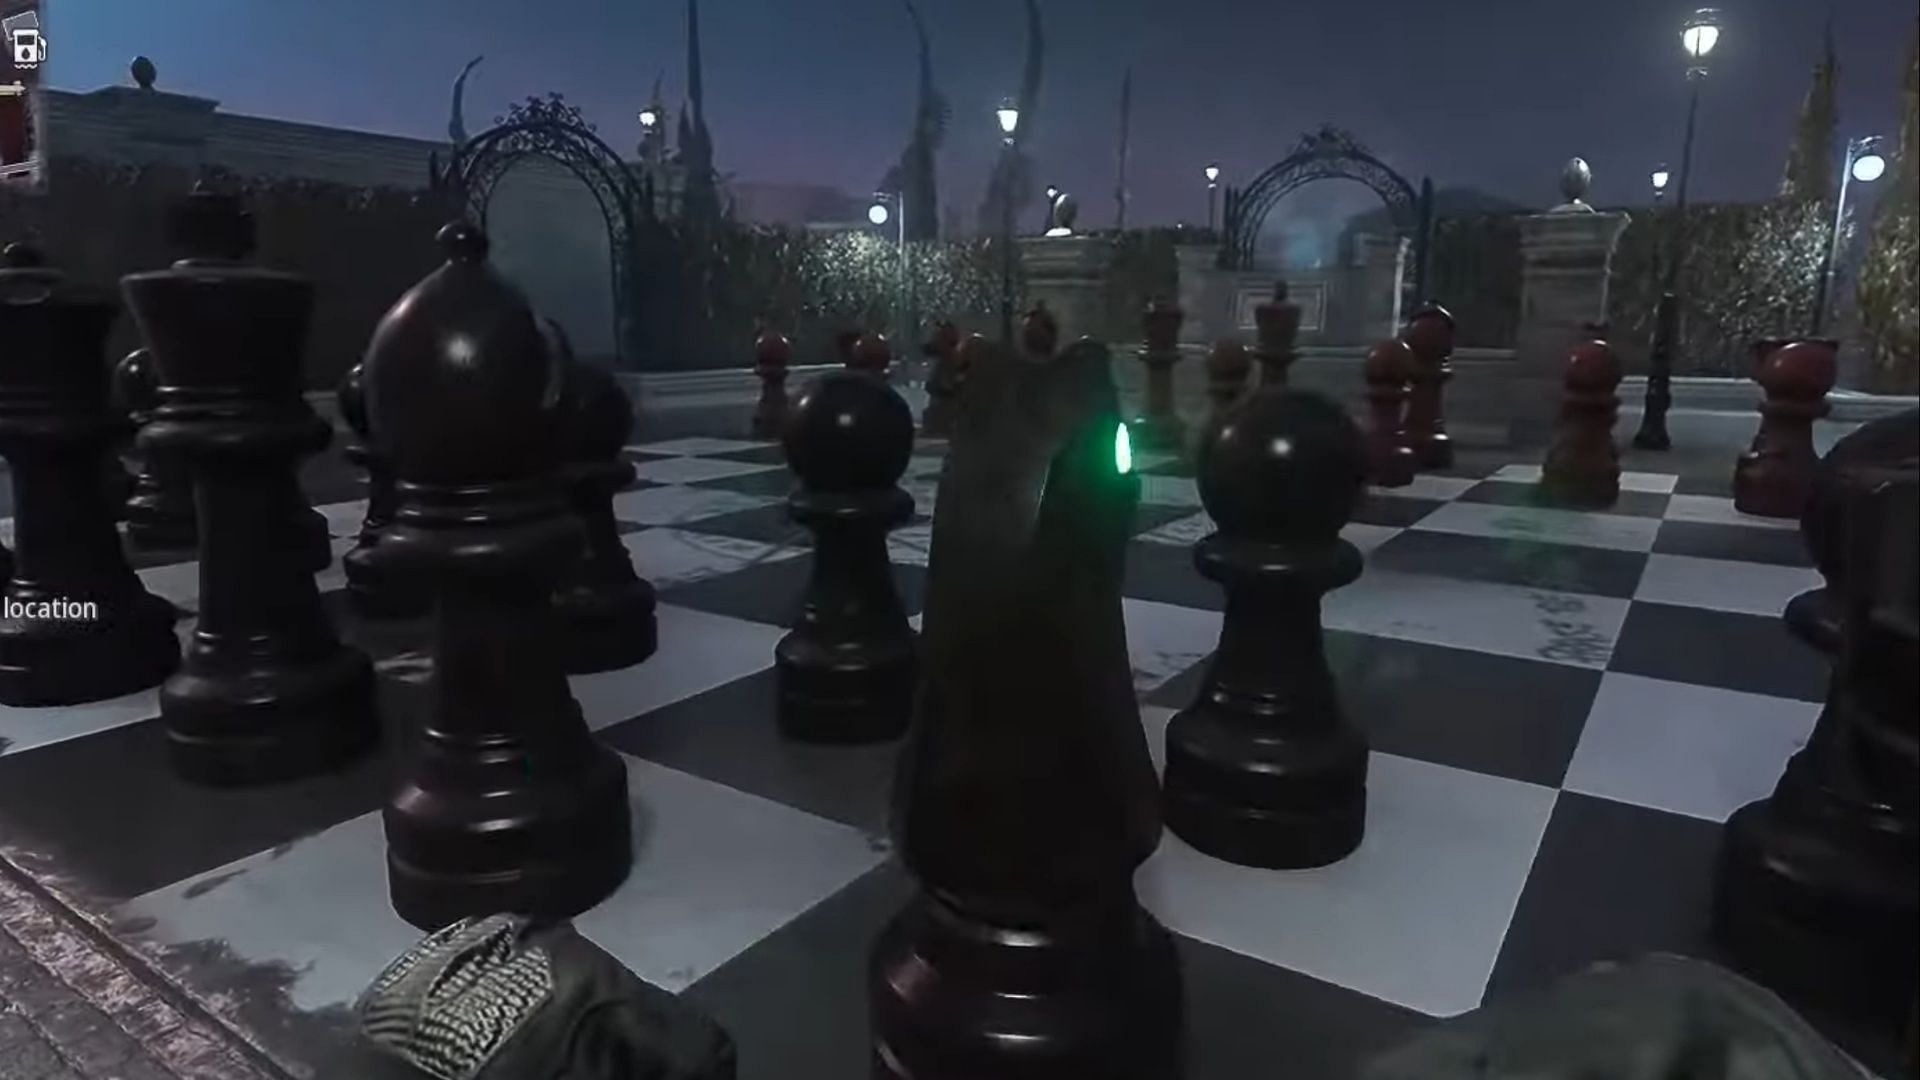 How to complete the Chess Board Easter Egg in Warzone 2's Vondead